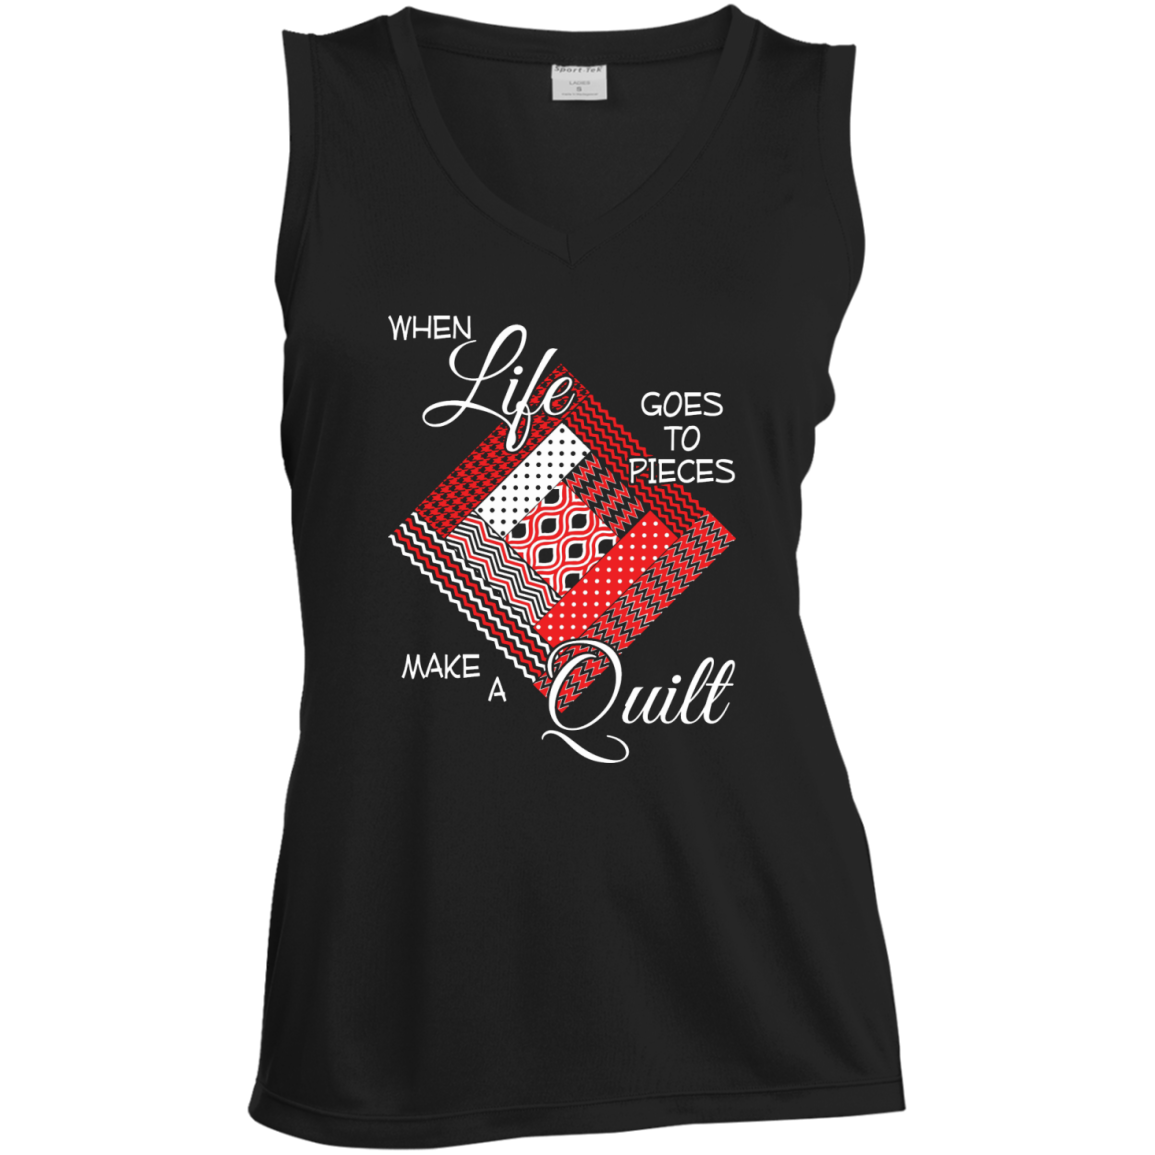 Make a Quilt (red) Ladies Sleeveless V-Neck - Crafter4Life - 2